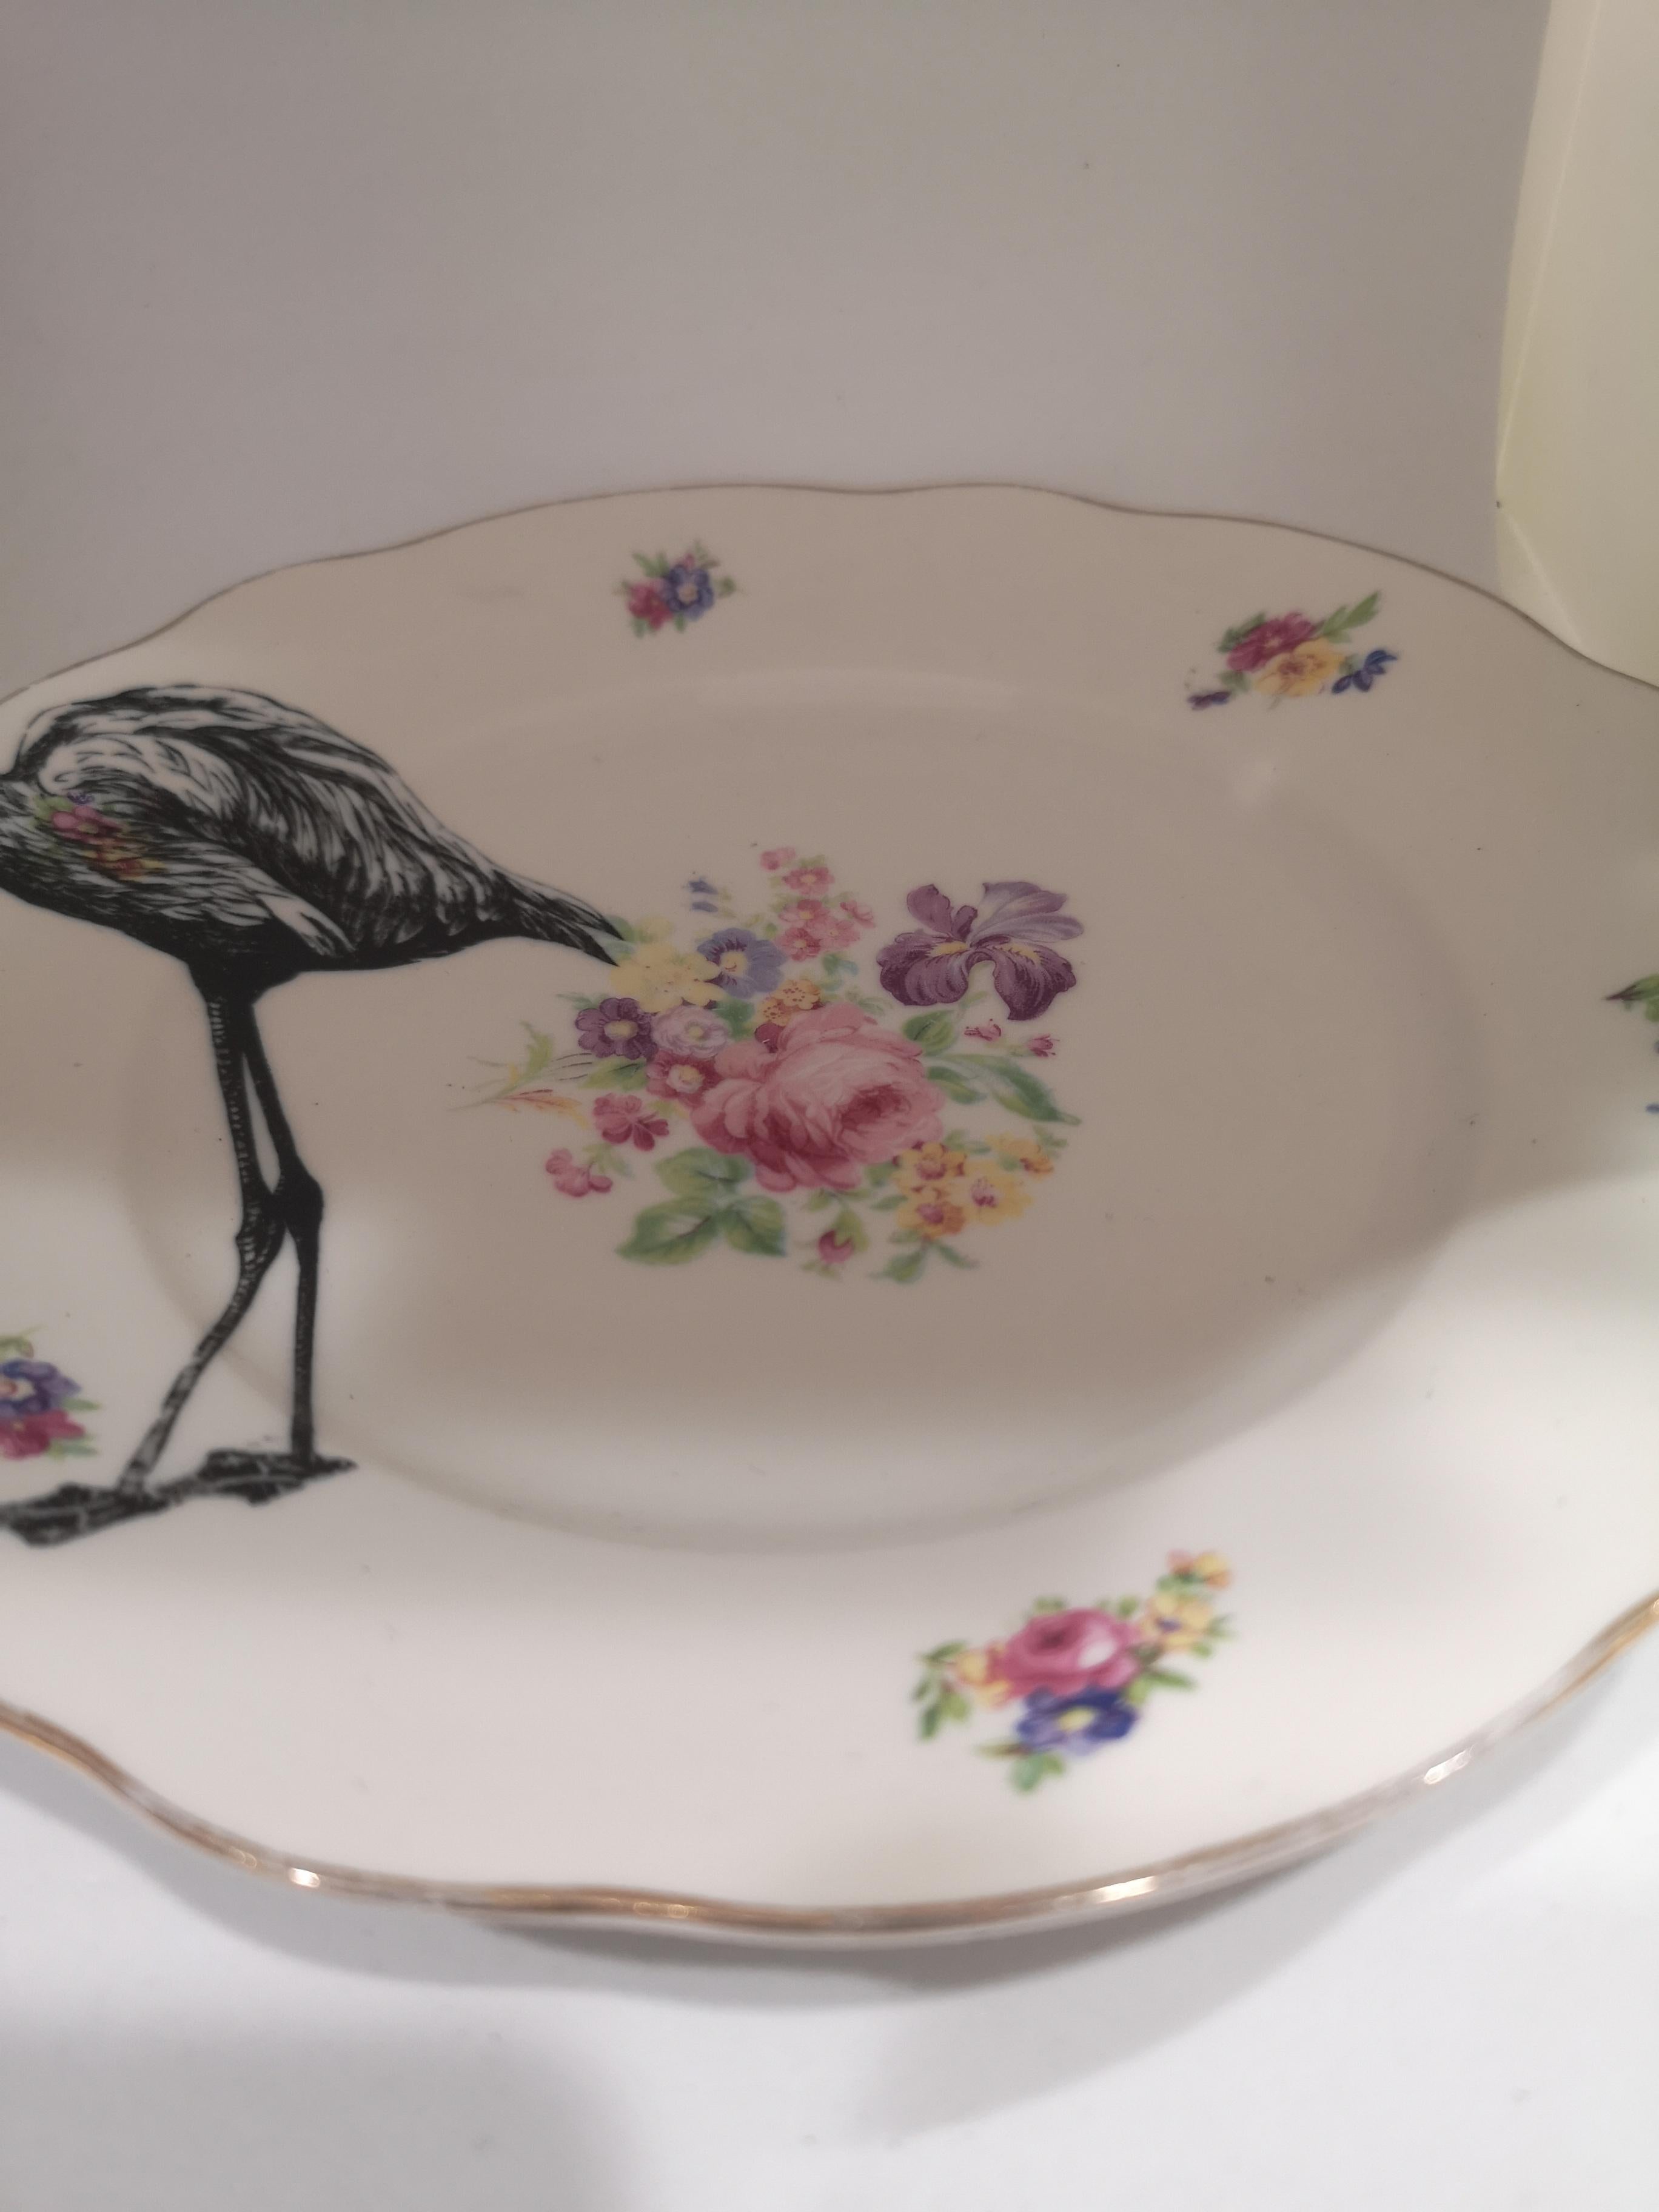 Flamingo plate appliedon vintage dessert and coffee plates.
Kindly note that they have to be washed by hands and as they are vintage plates they an show any scratch or signs due to the age